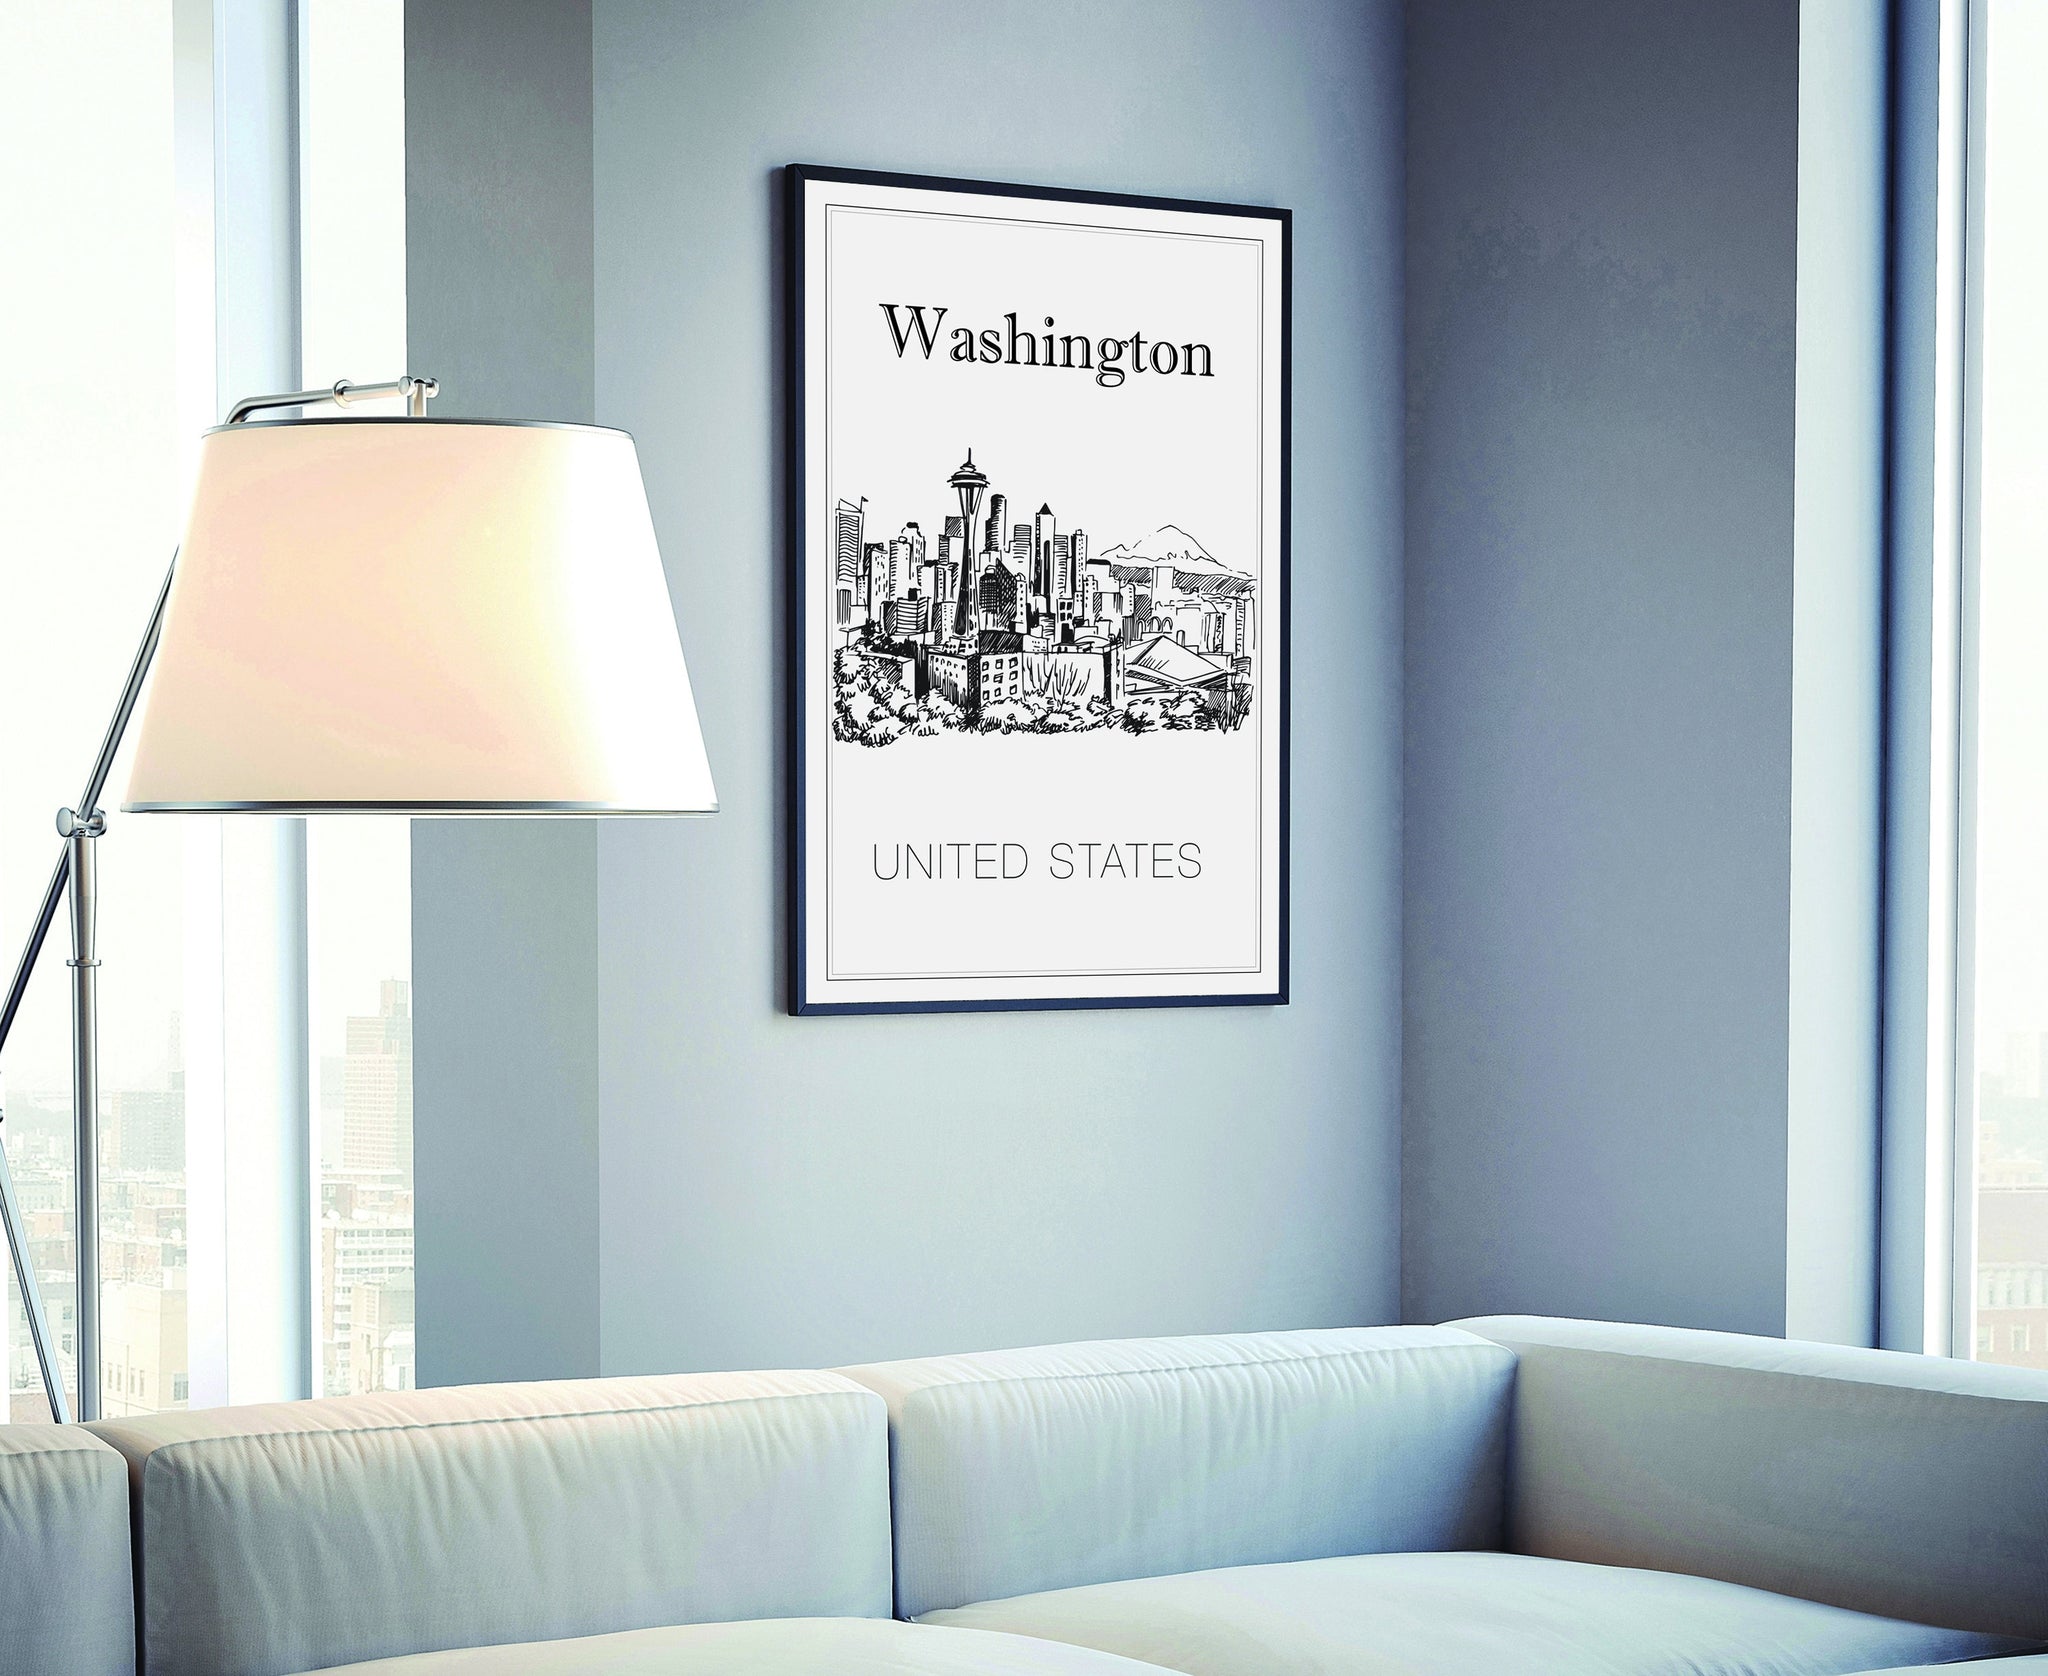 Hand Drawn Poster, Washington Travel Poster, United States Poster Wall Art, Washington Cityscape and Landmark Map, City Map Poster for Home